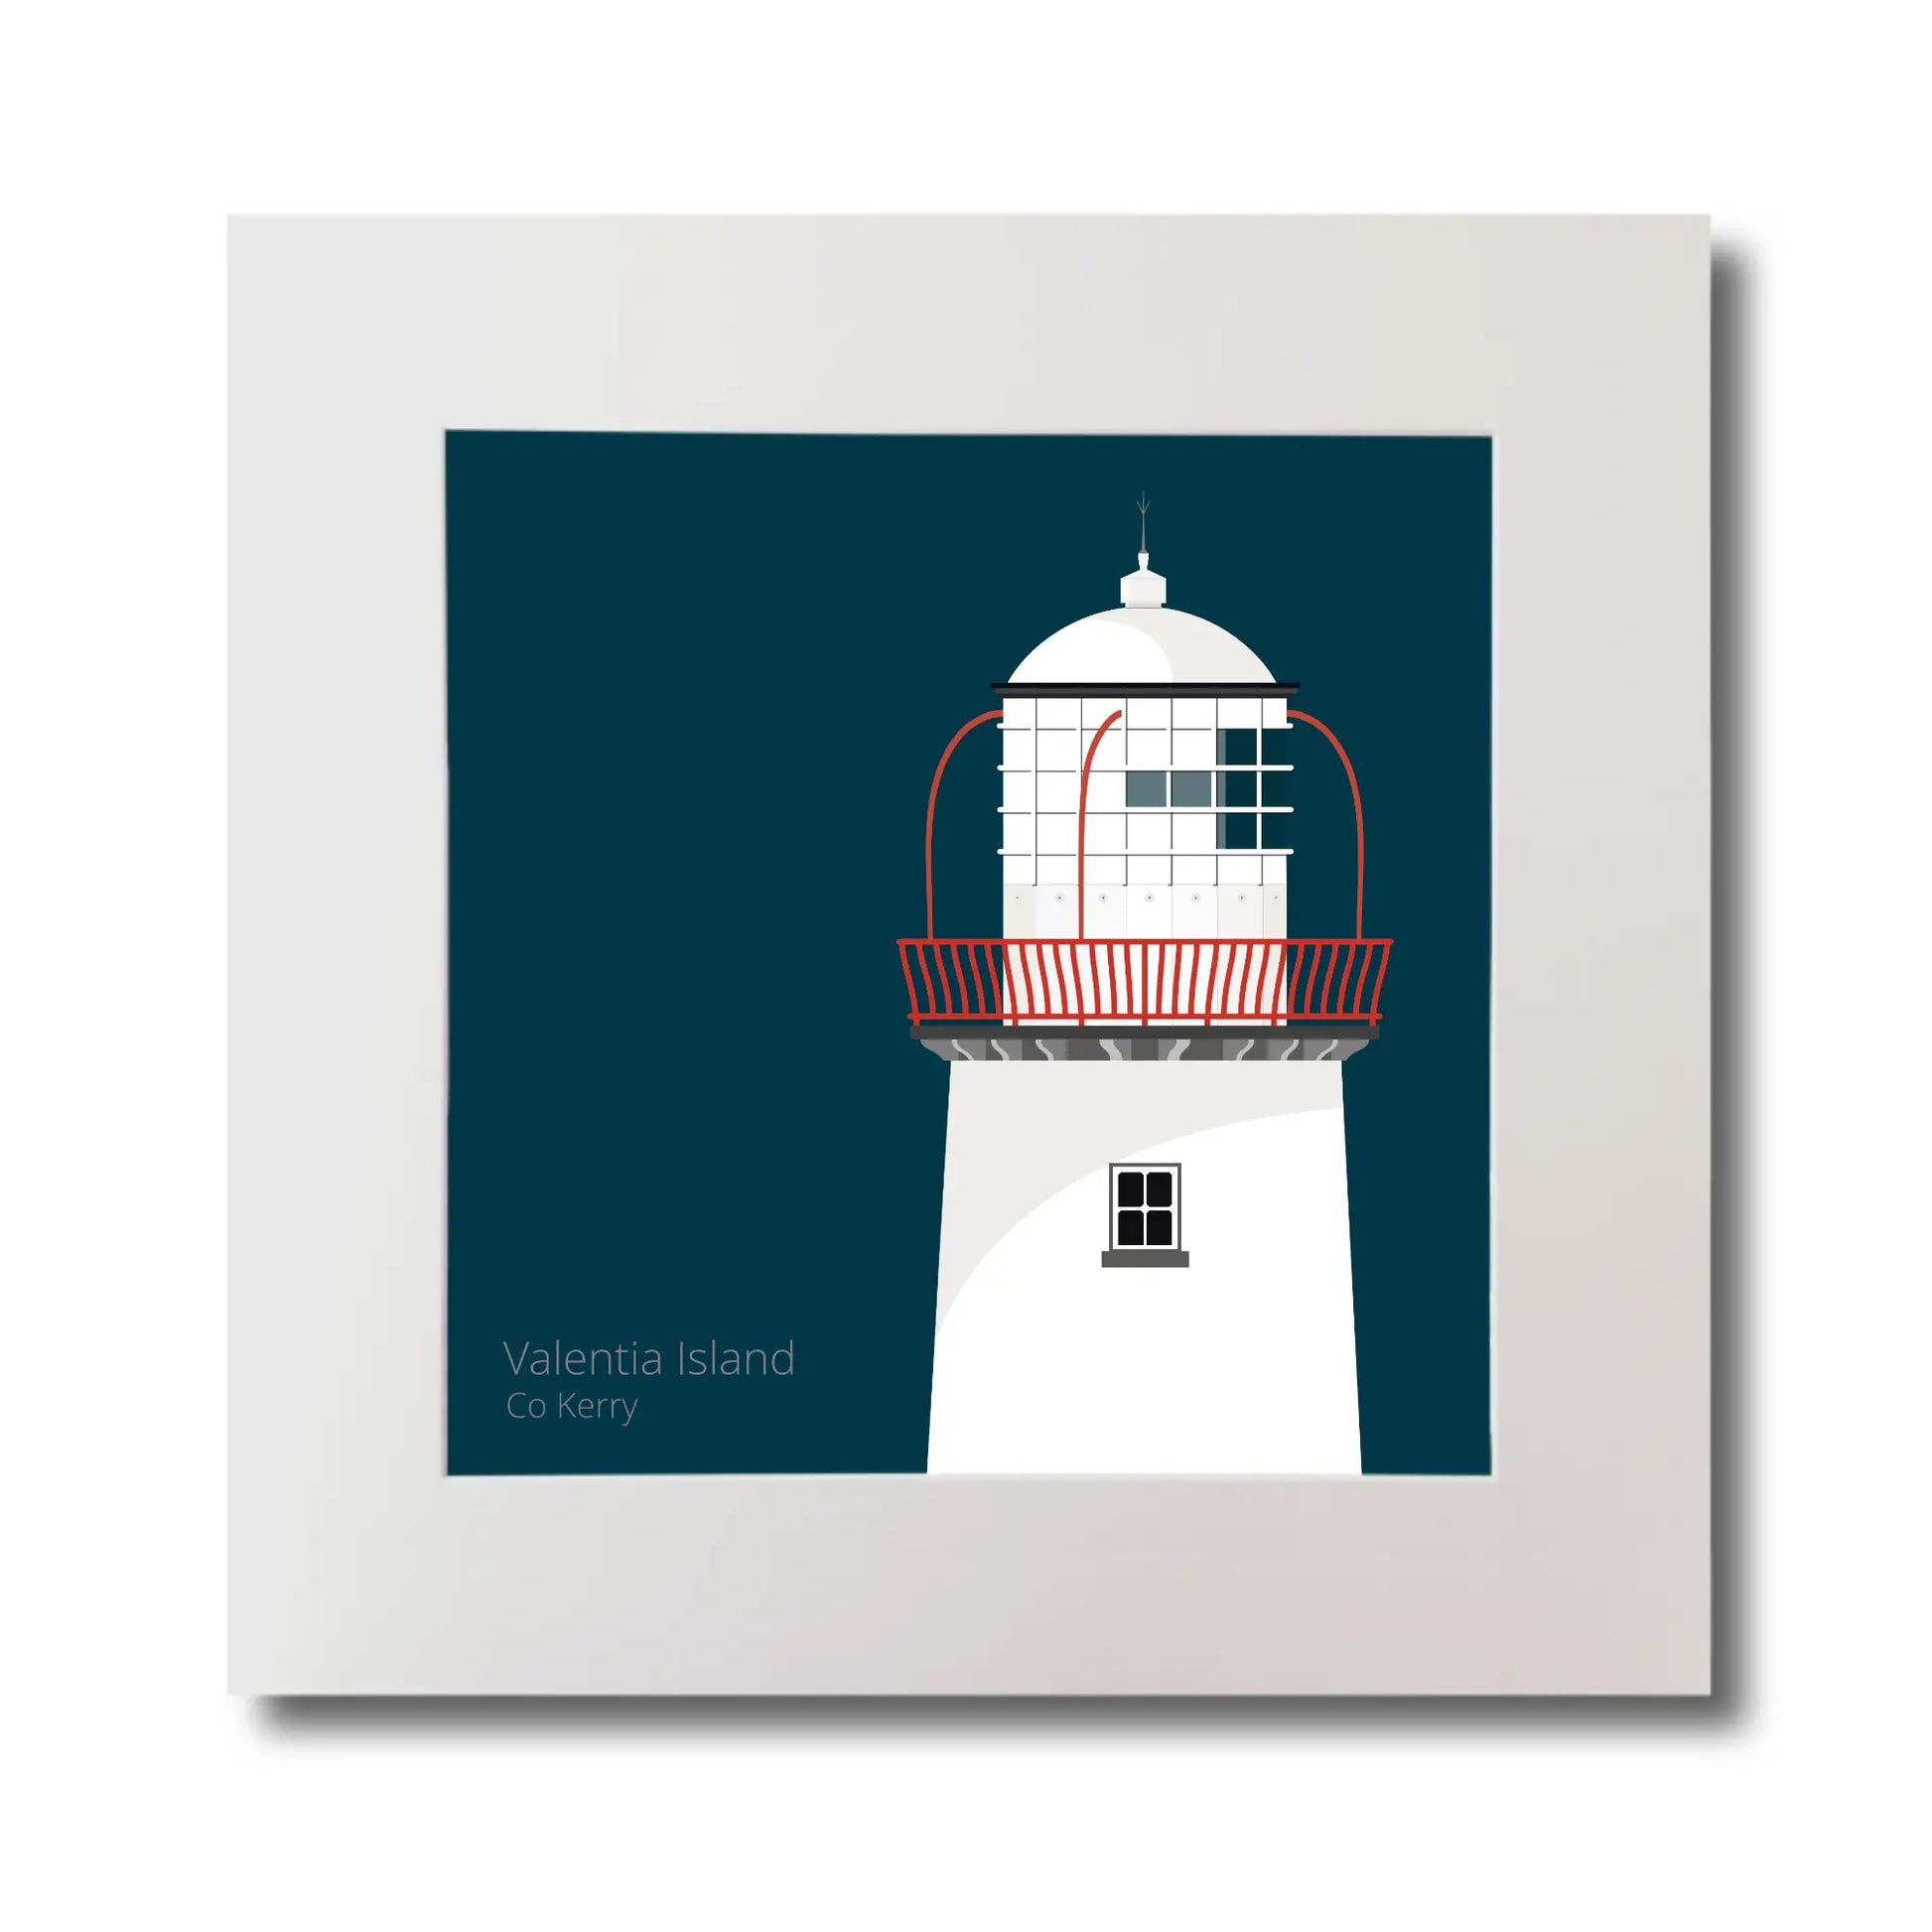 Illustration of Galley Head lighthouse on a midnight blue background, mounted and measuring 30x30cm.